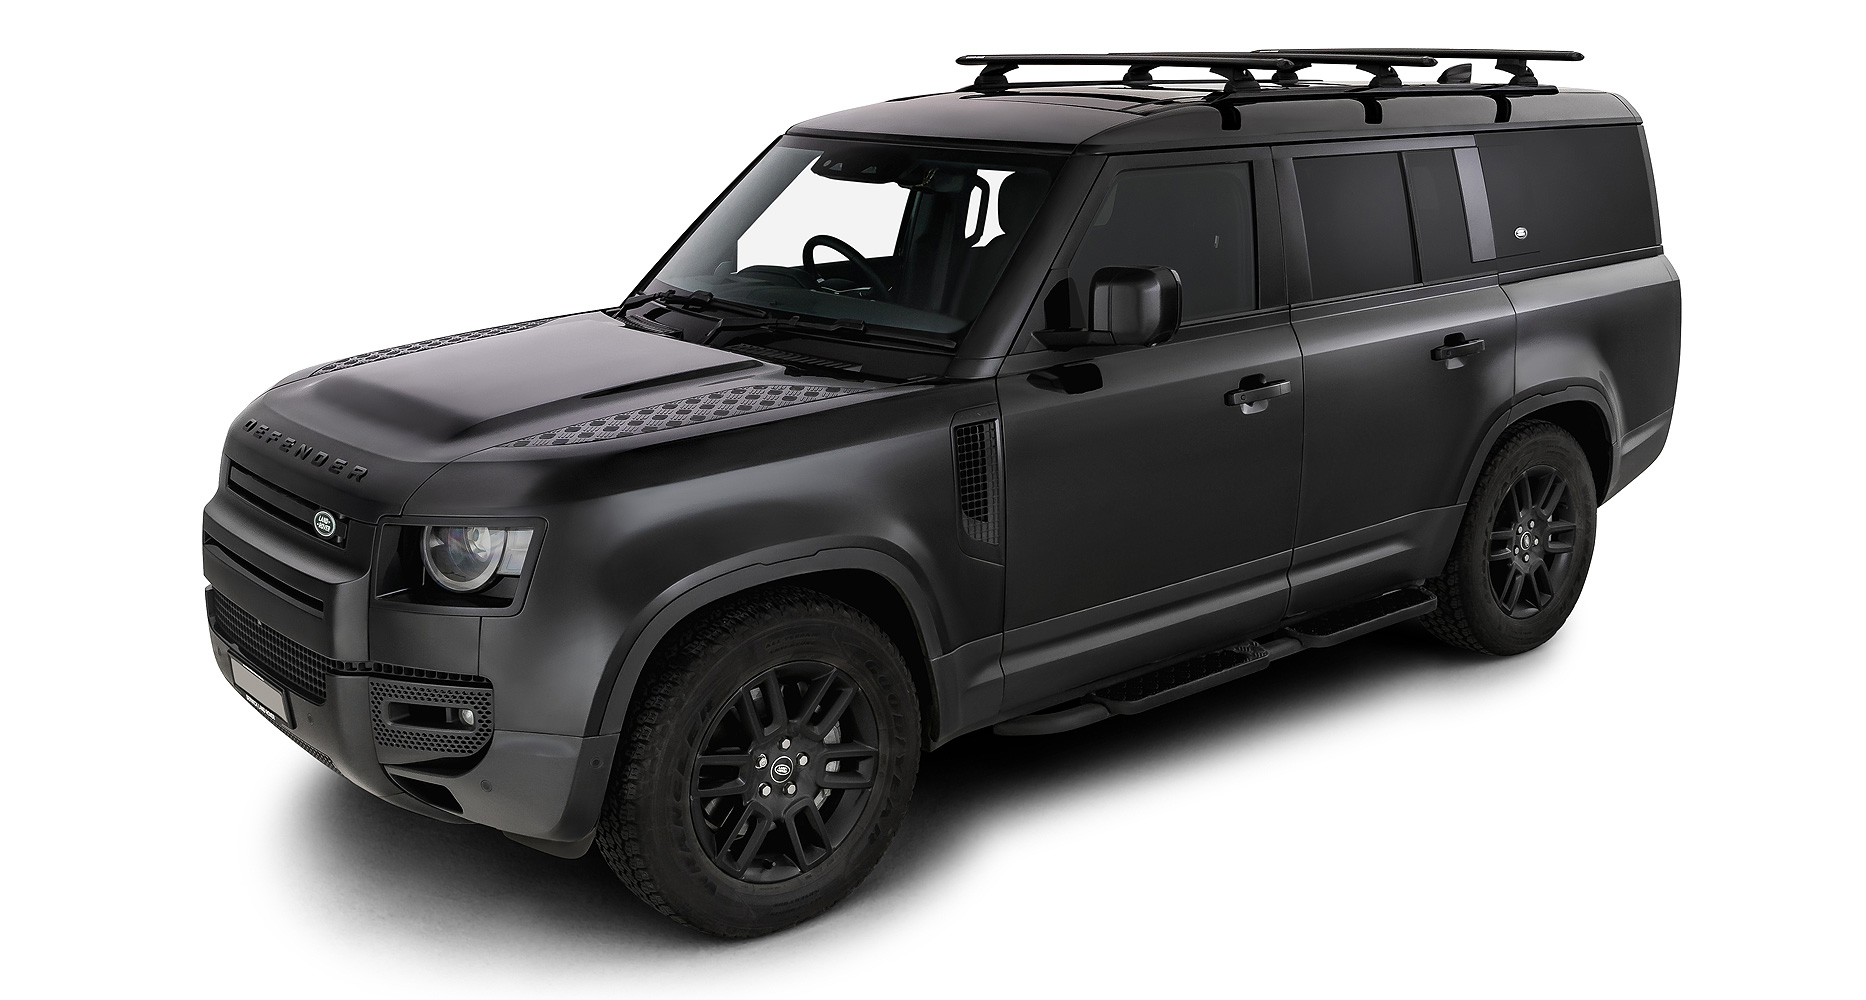 Rhino Rack JC-01926 Vortex RCL Black 3 Bar Roof Rack for Land Rover Defender 90 Gen2 3dr SUV with Factory Fitted Track (2020 onwards) - Factory Point Mount